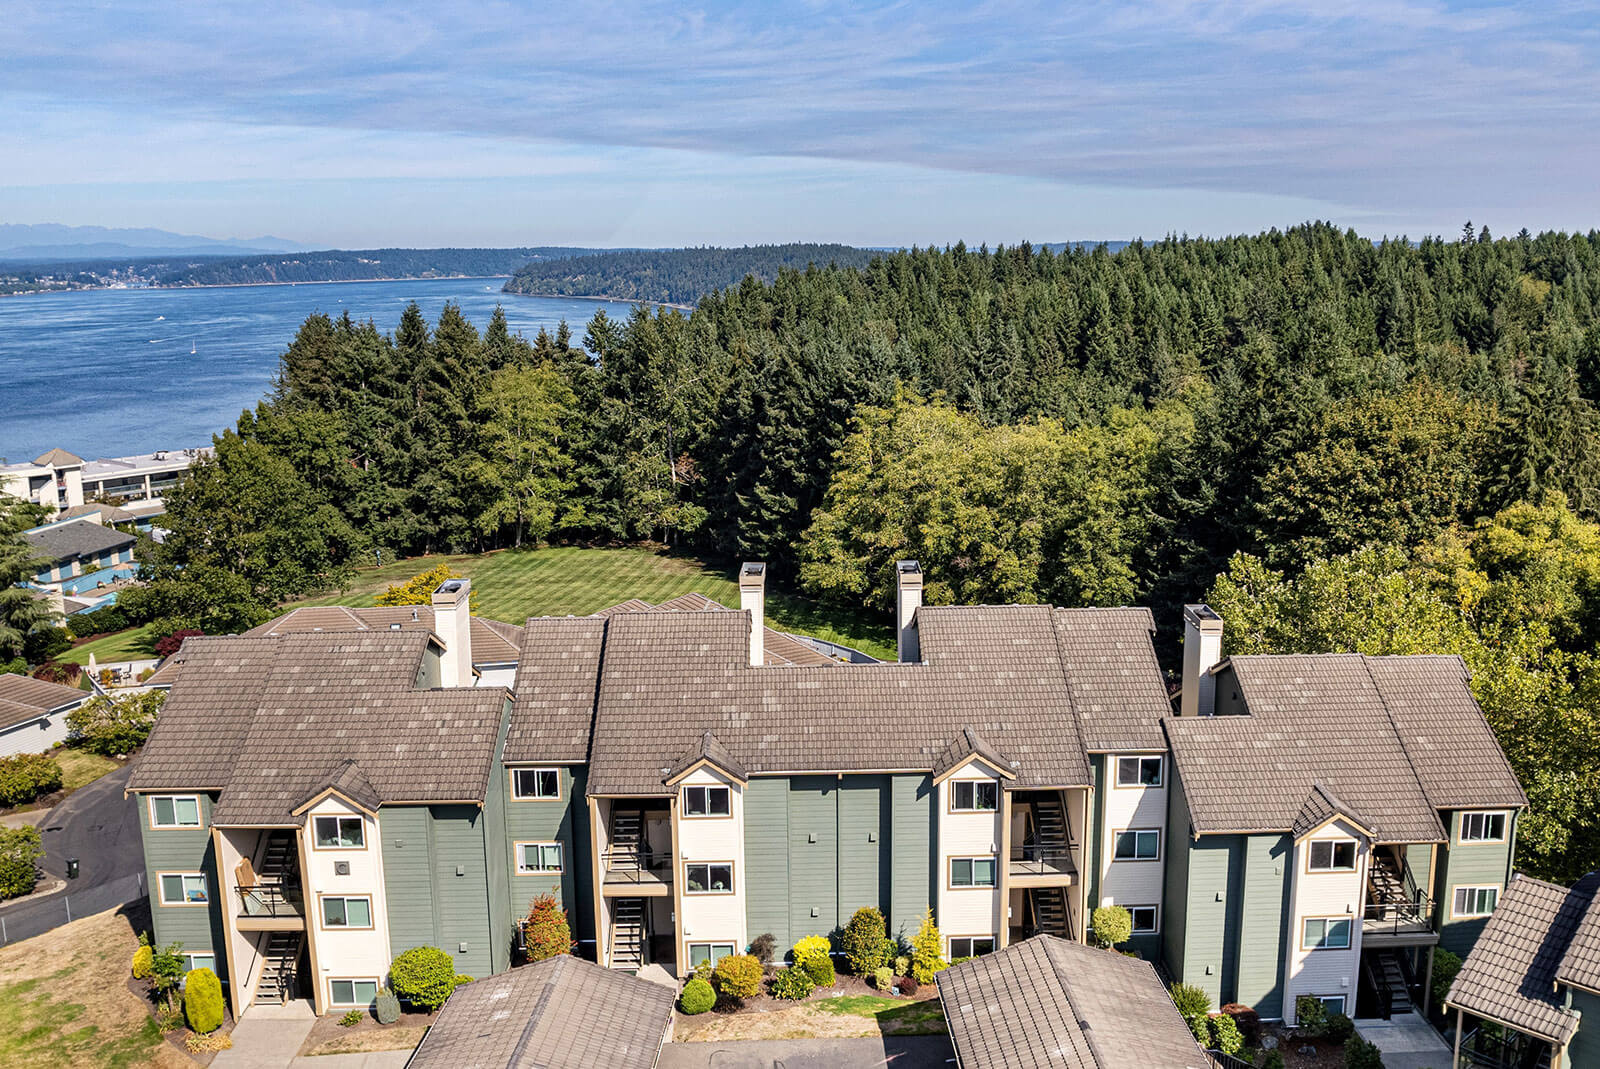 Gold Pointe offers resort-like amenities and views of the Tacoma Narrows